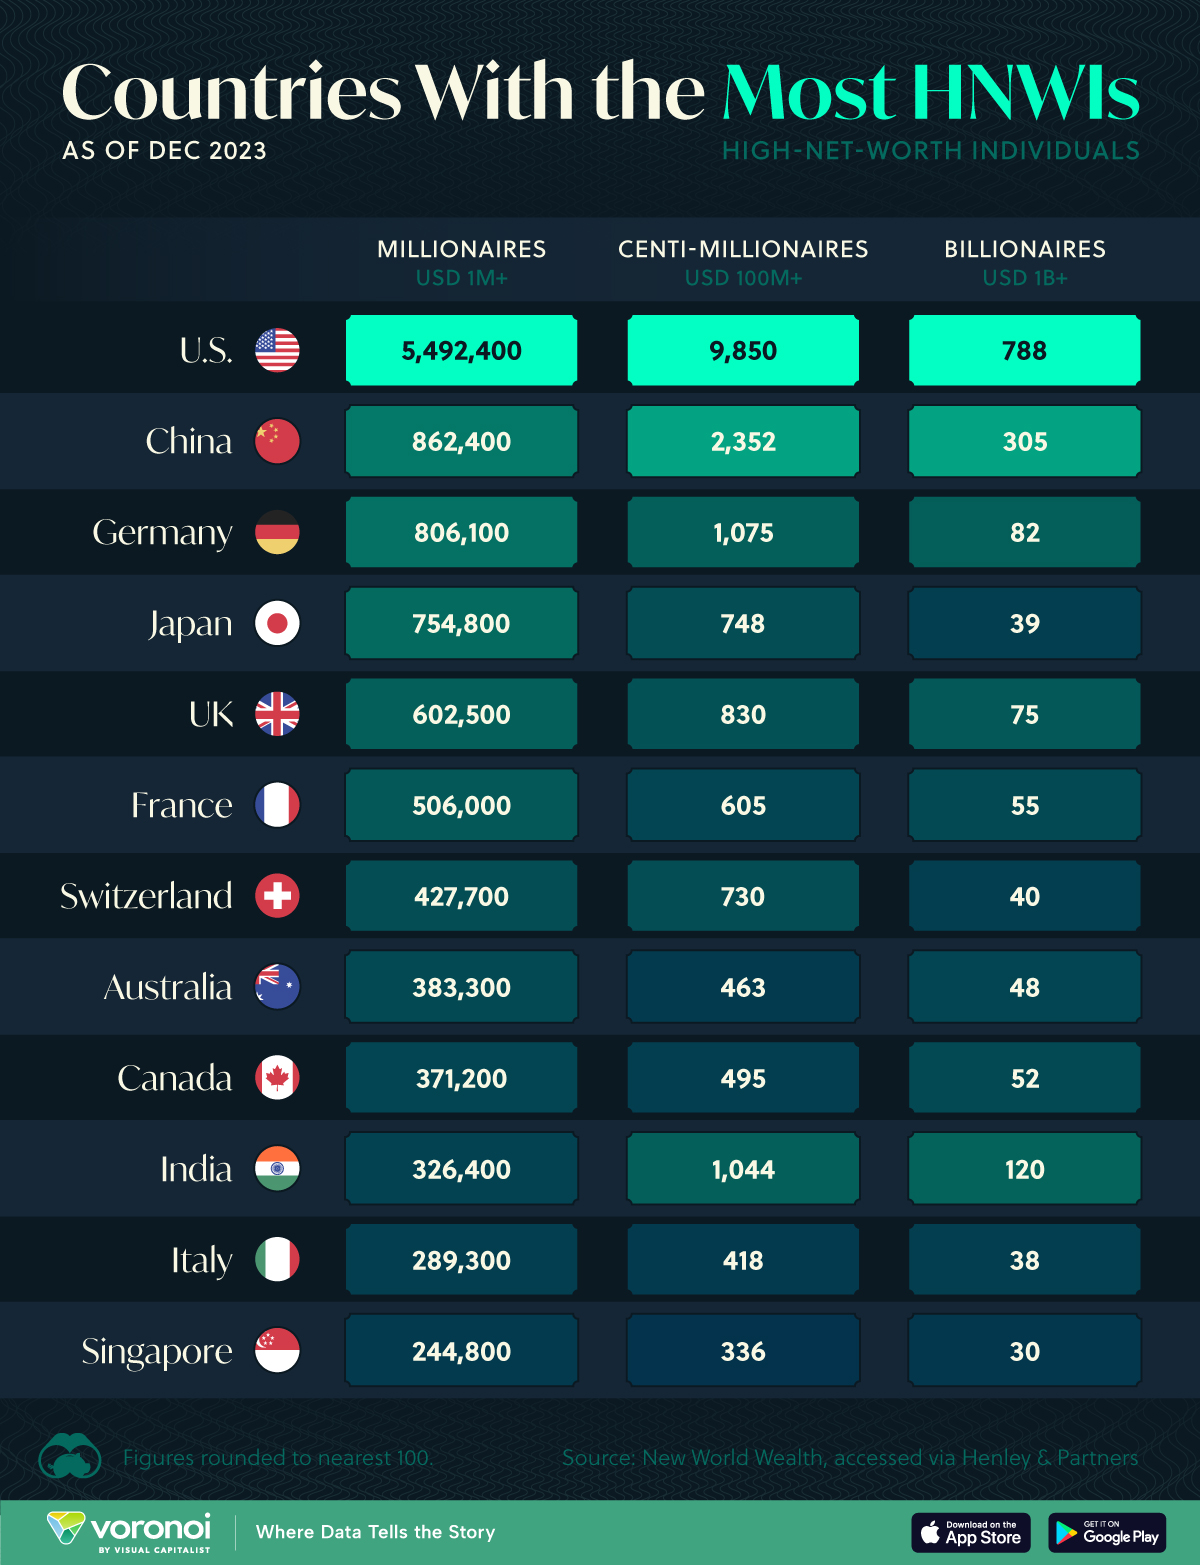 This graphic lists the top 12 countries by number of high net worth individuals (HNWIs).